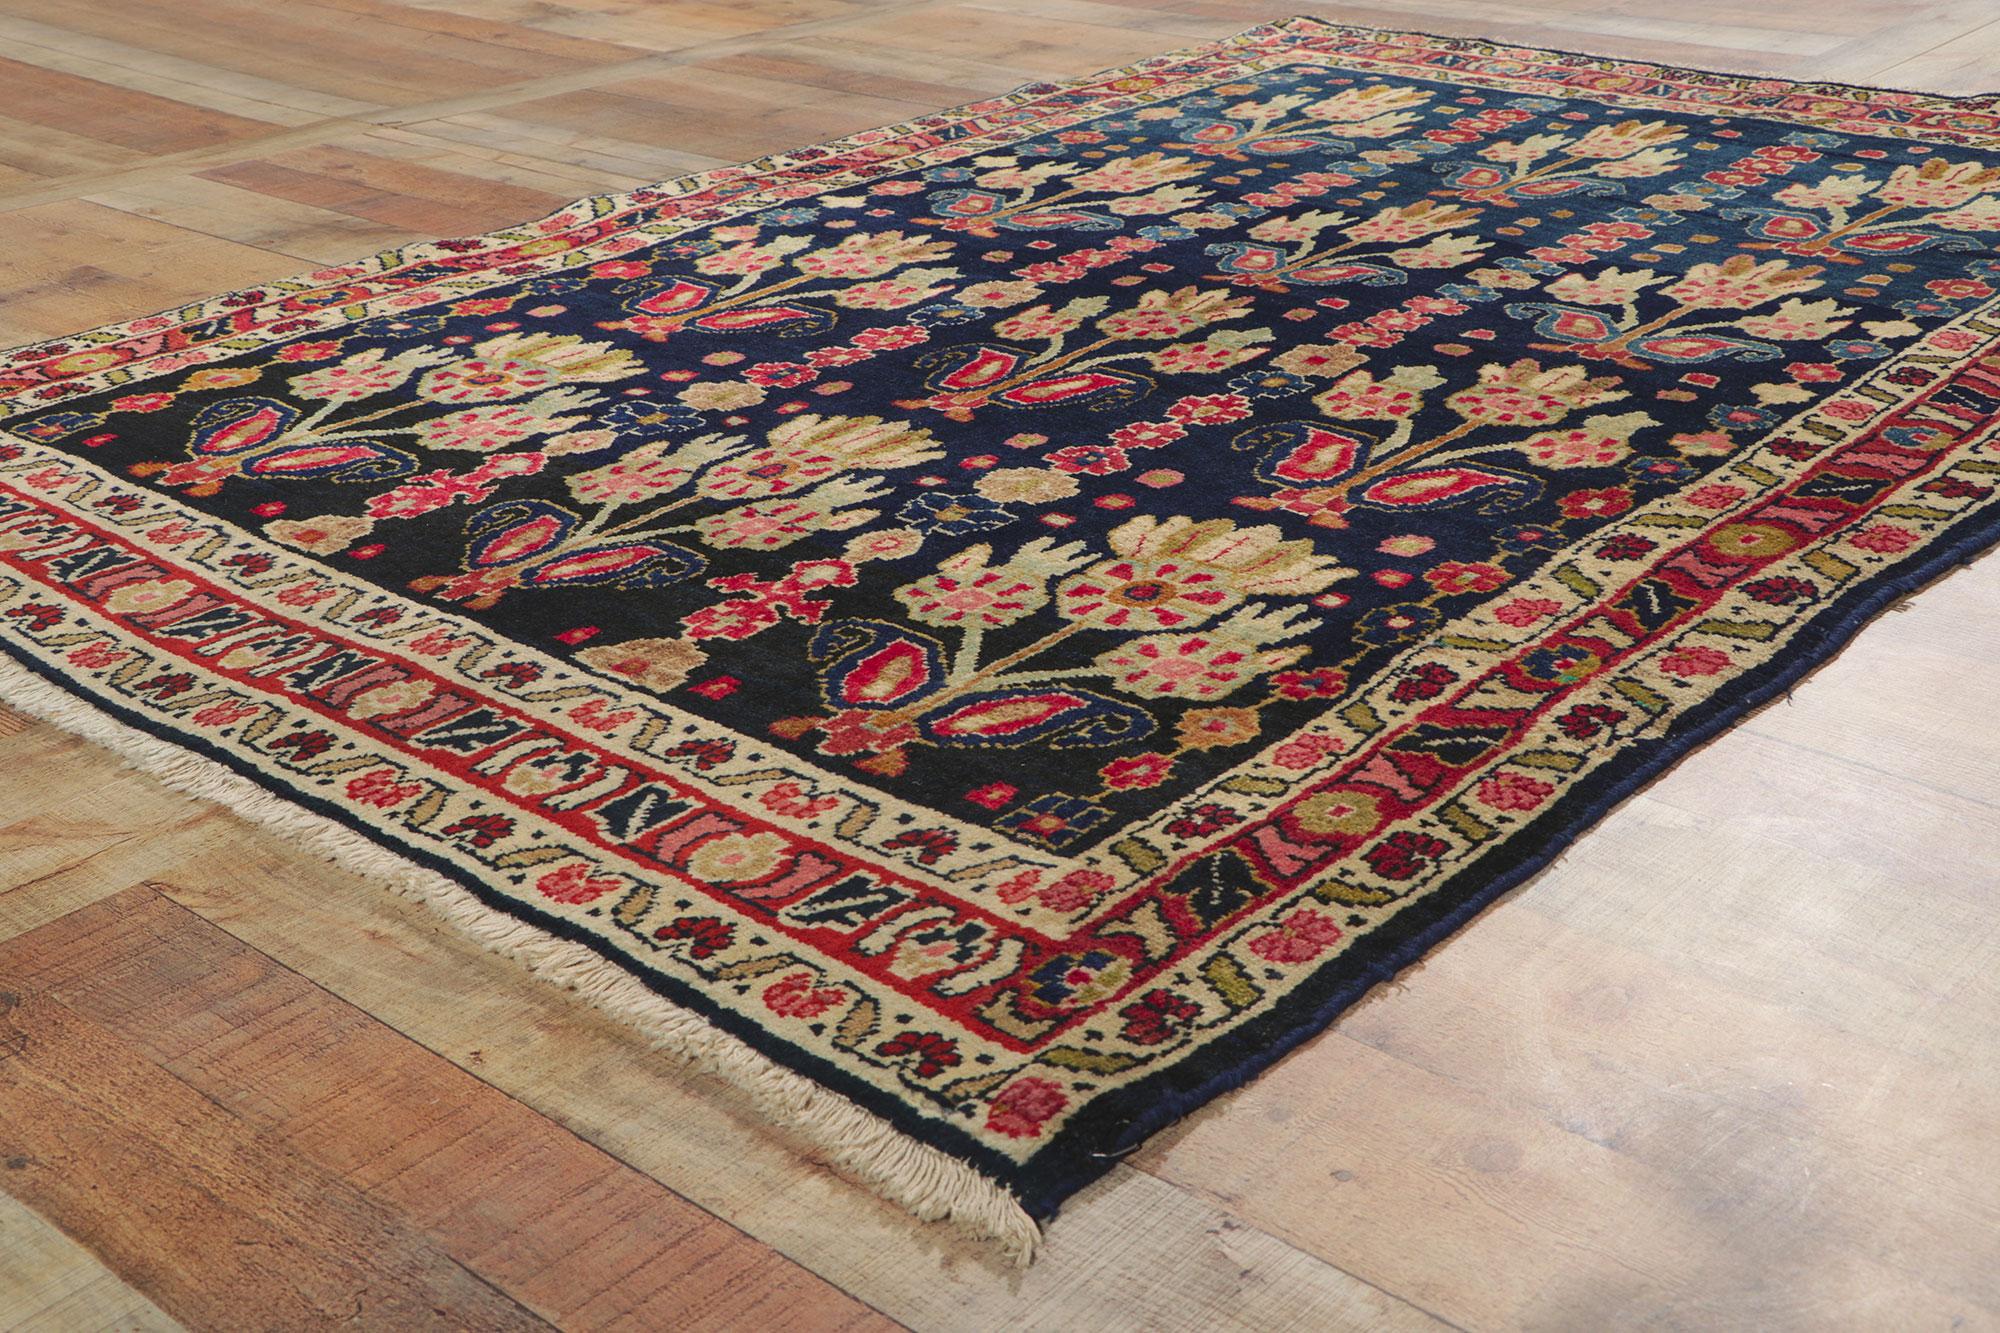 20th Century Antique Persian Mahal Rug, Timeless Elegance Meets Cultivated Beauty